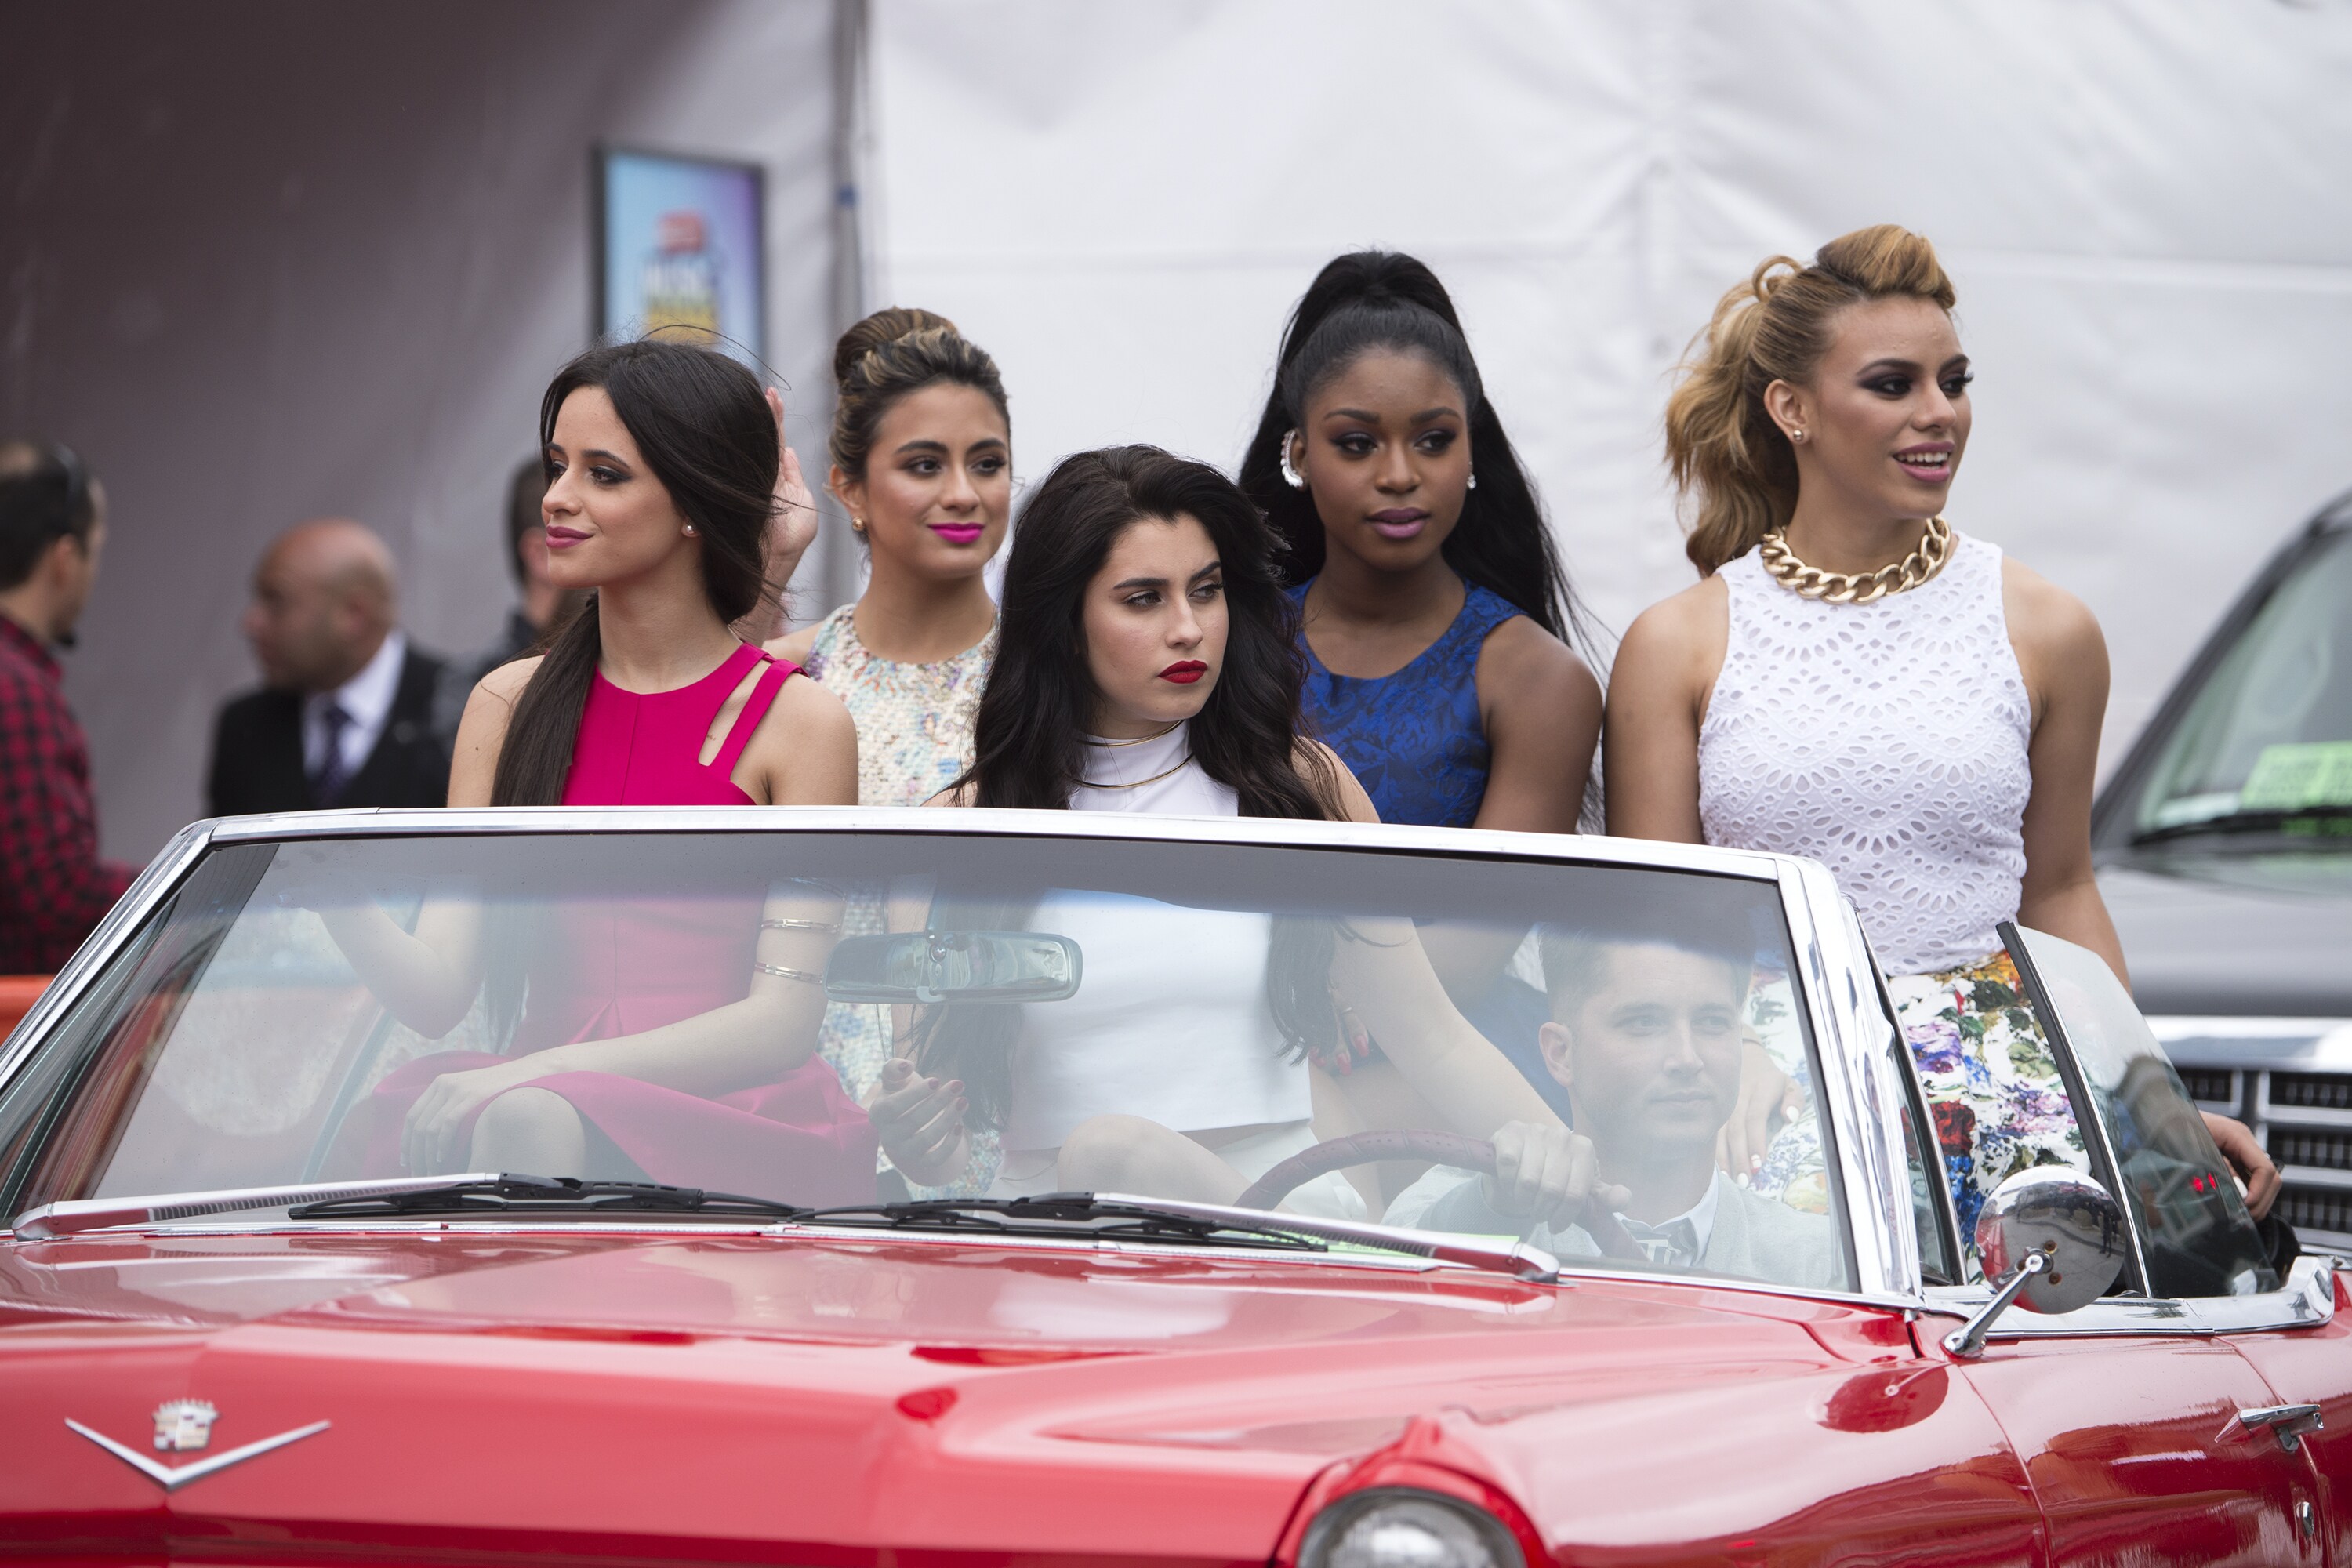 Fifth Harmony Arrives At The Red Carpet